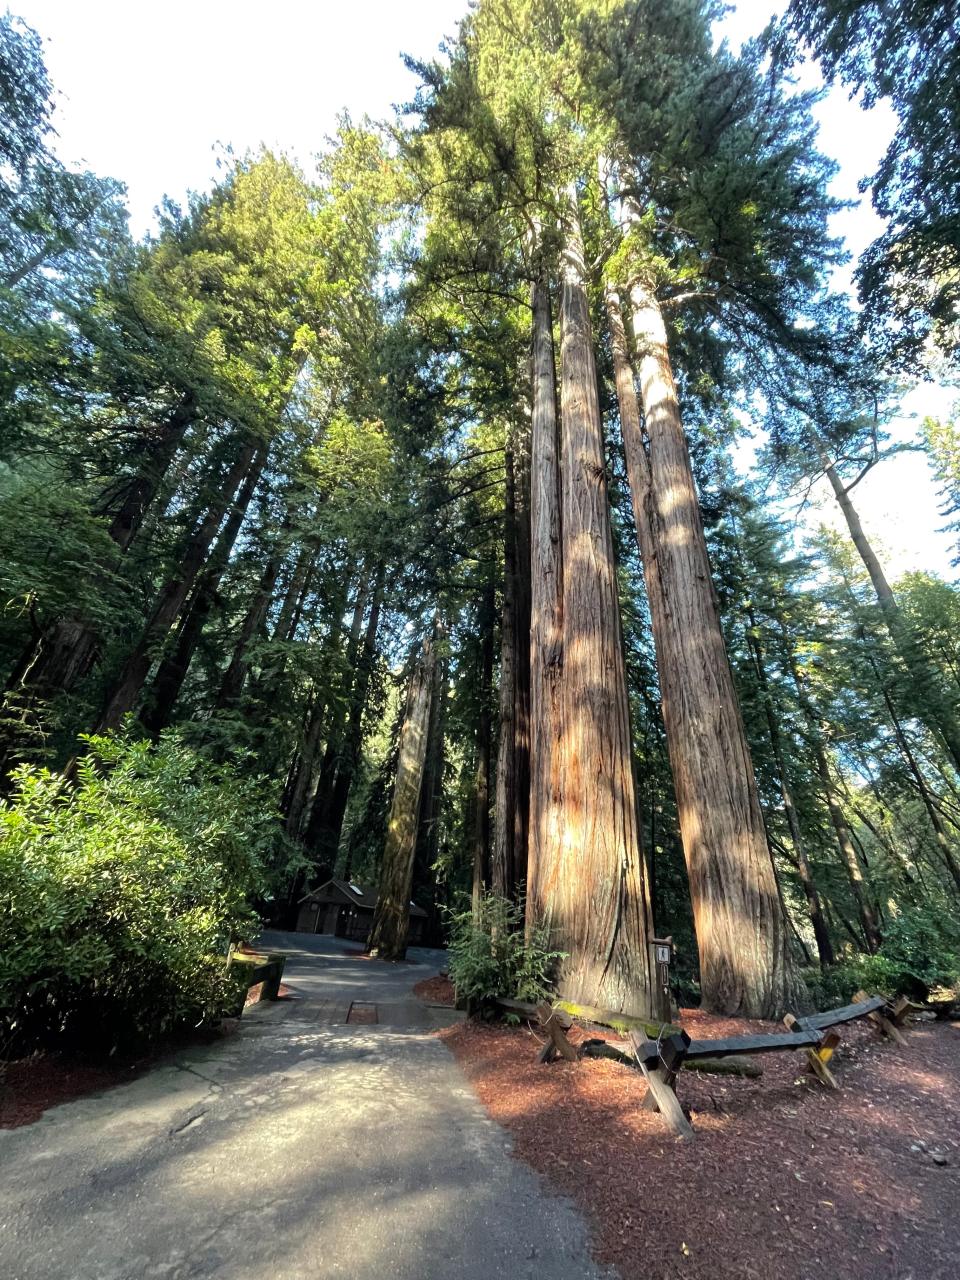 Armstrong Redwoods State Natural Reserve is home to the world's tallest trees, creating a place of solace.